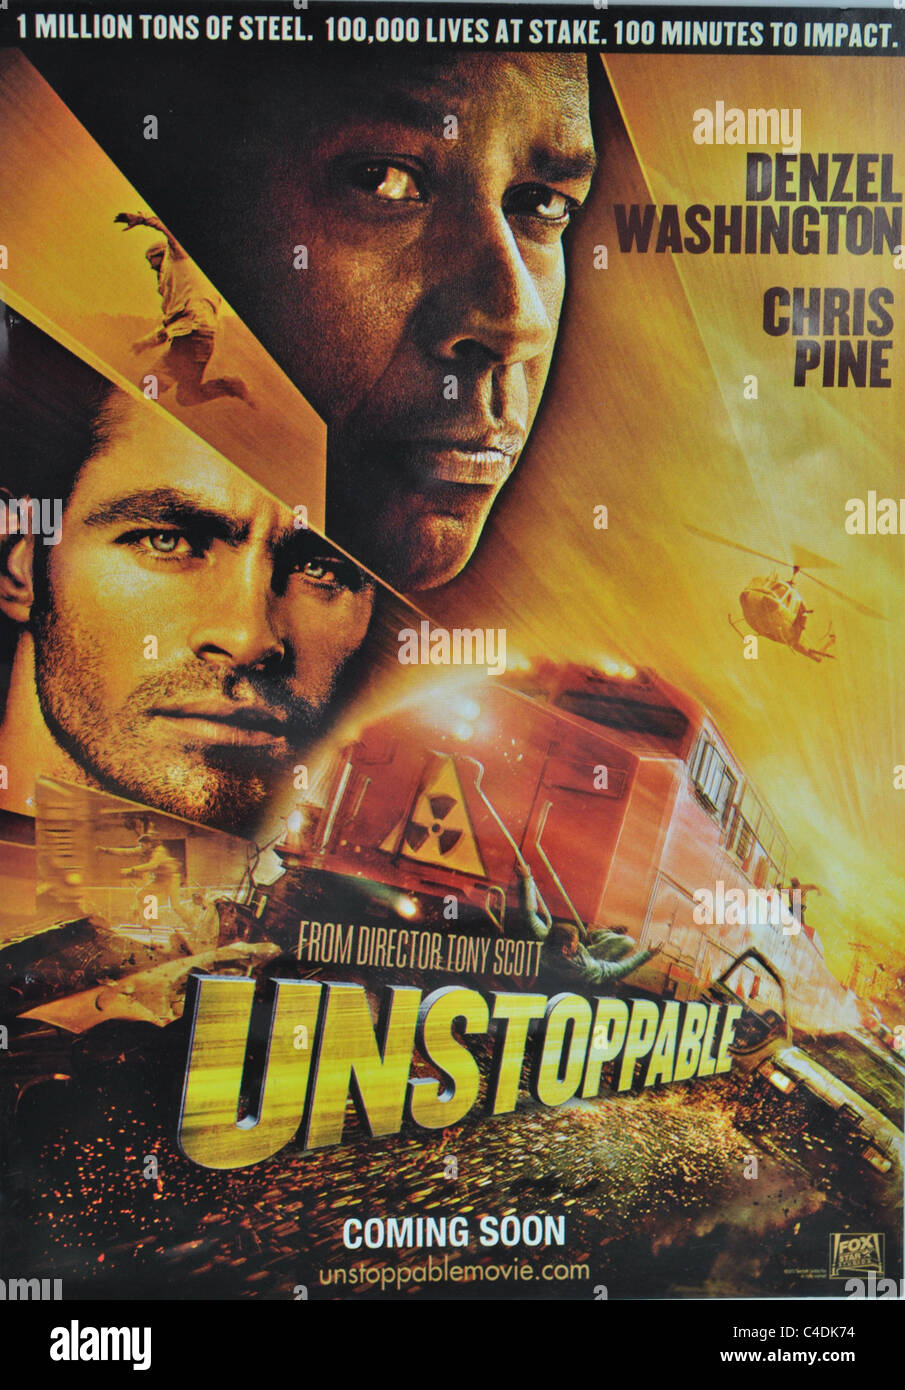 Poster Unstoppable Movie 2010 American film directed by Tony Scott starring Denzel Washington and Chris Pine Stock Photo